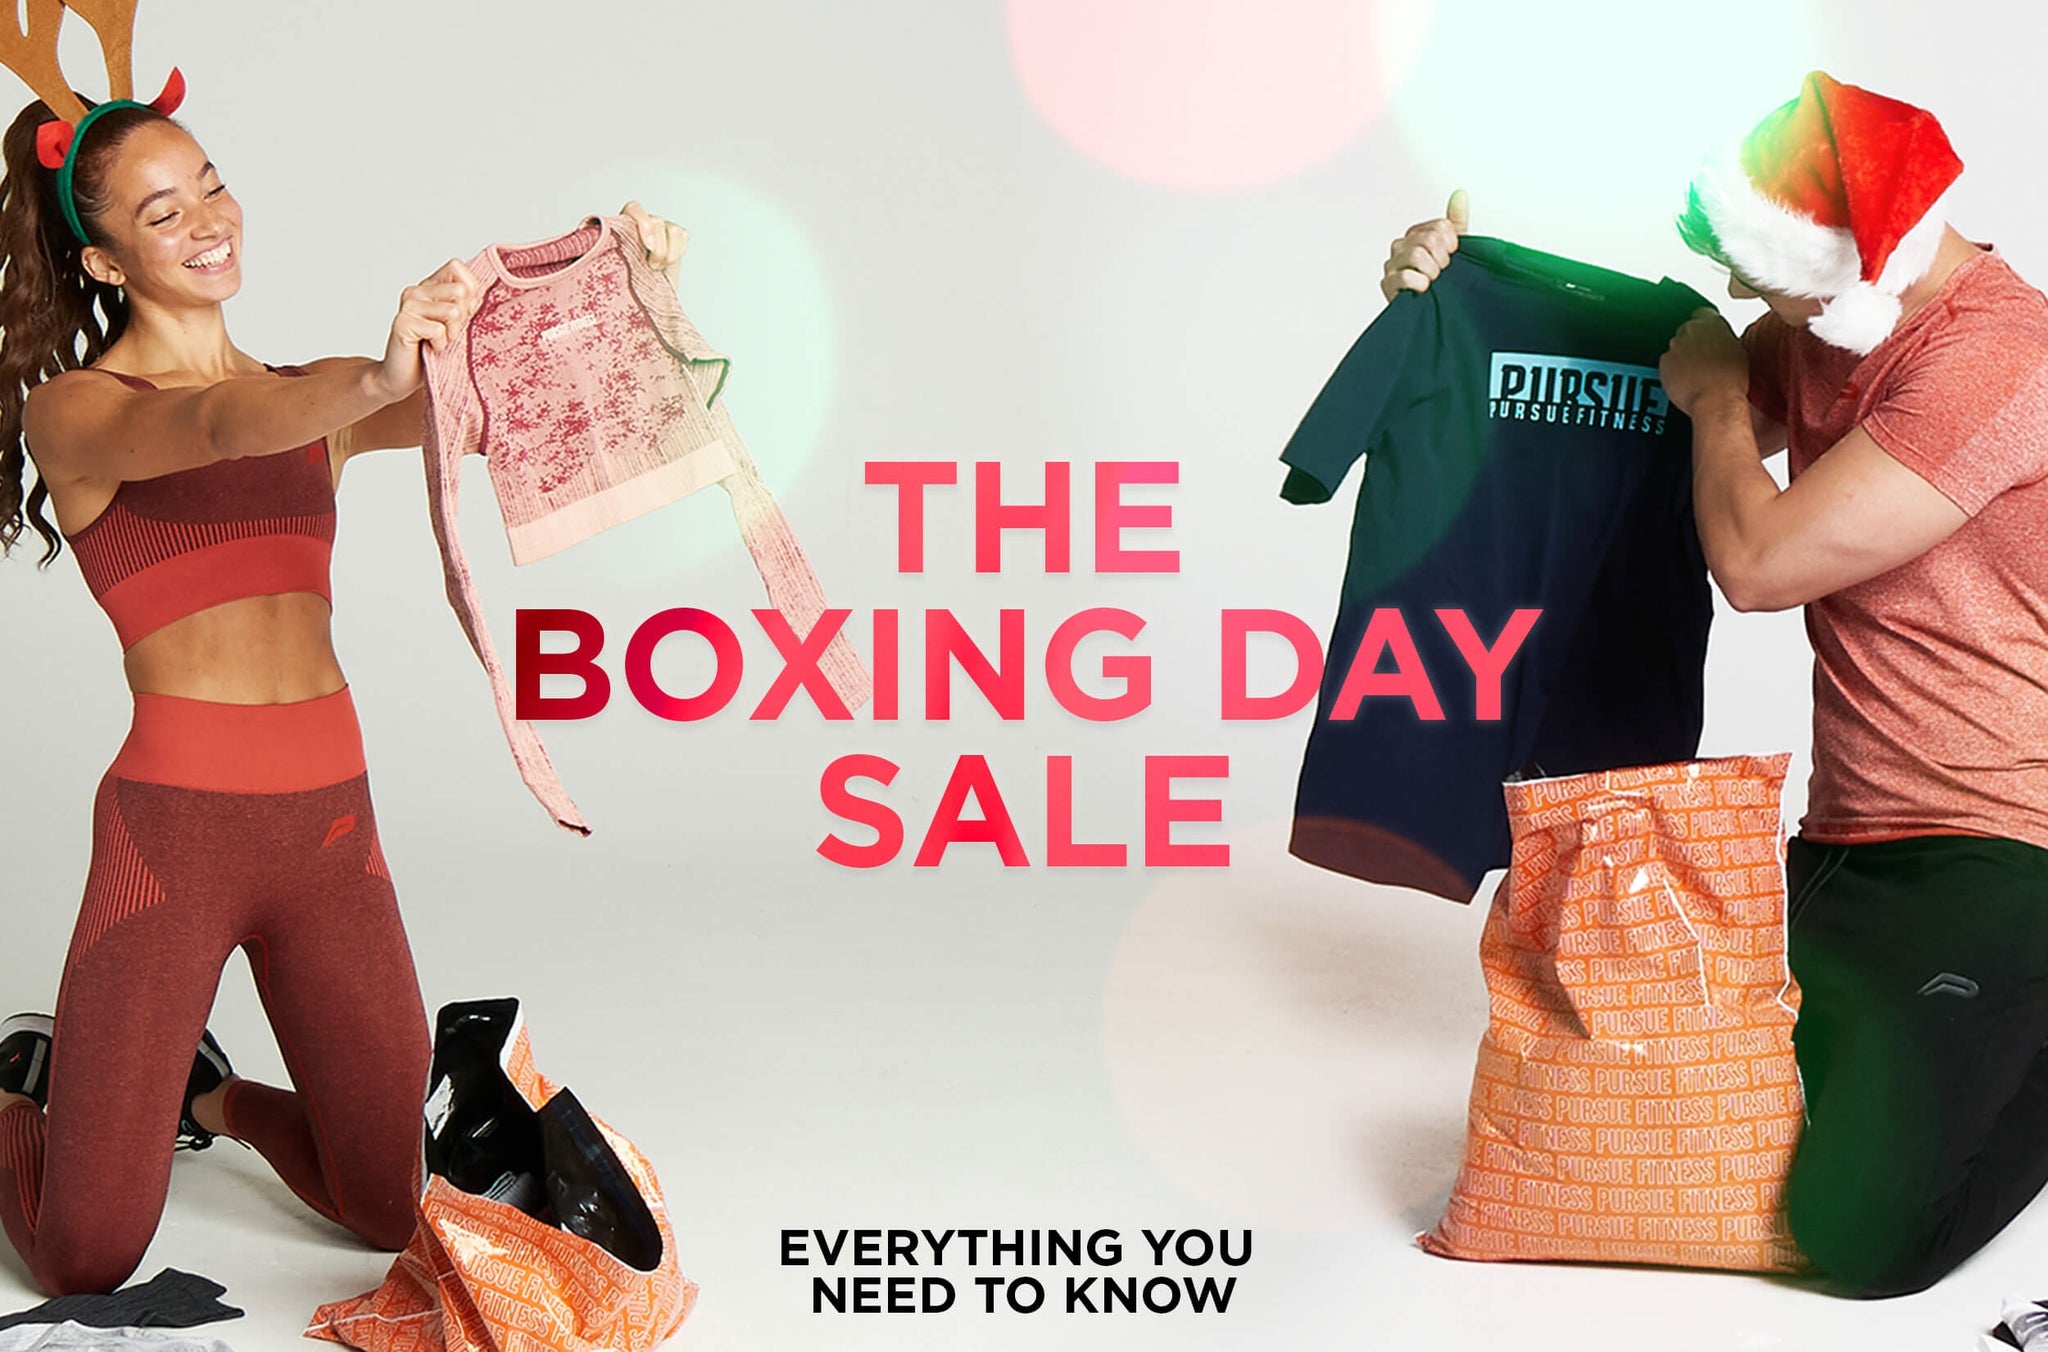 The Boxing Day Sale: 23rd December.-Pursue Fitness